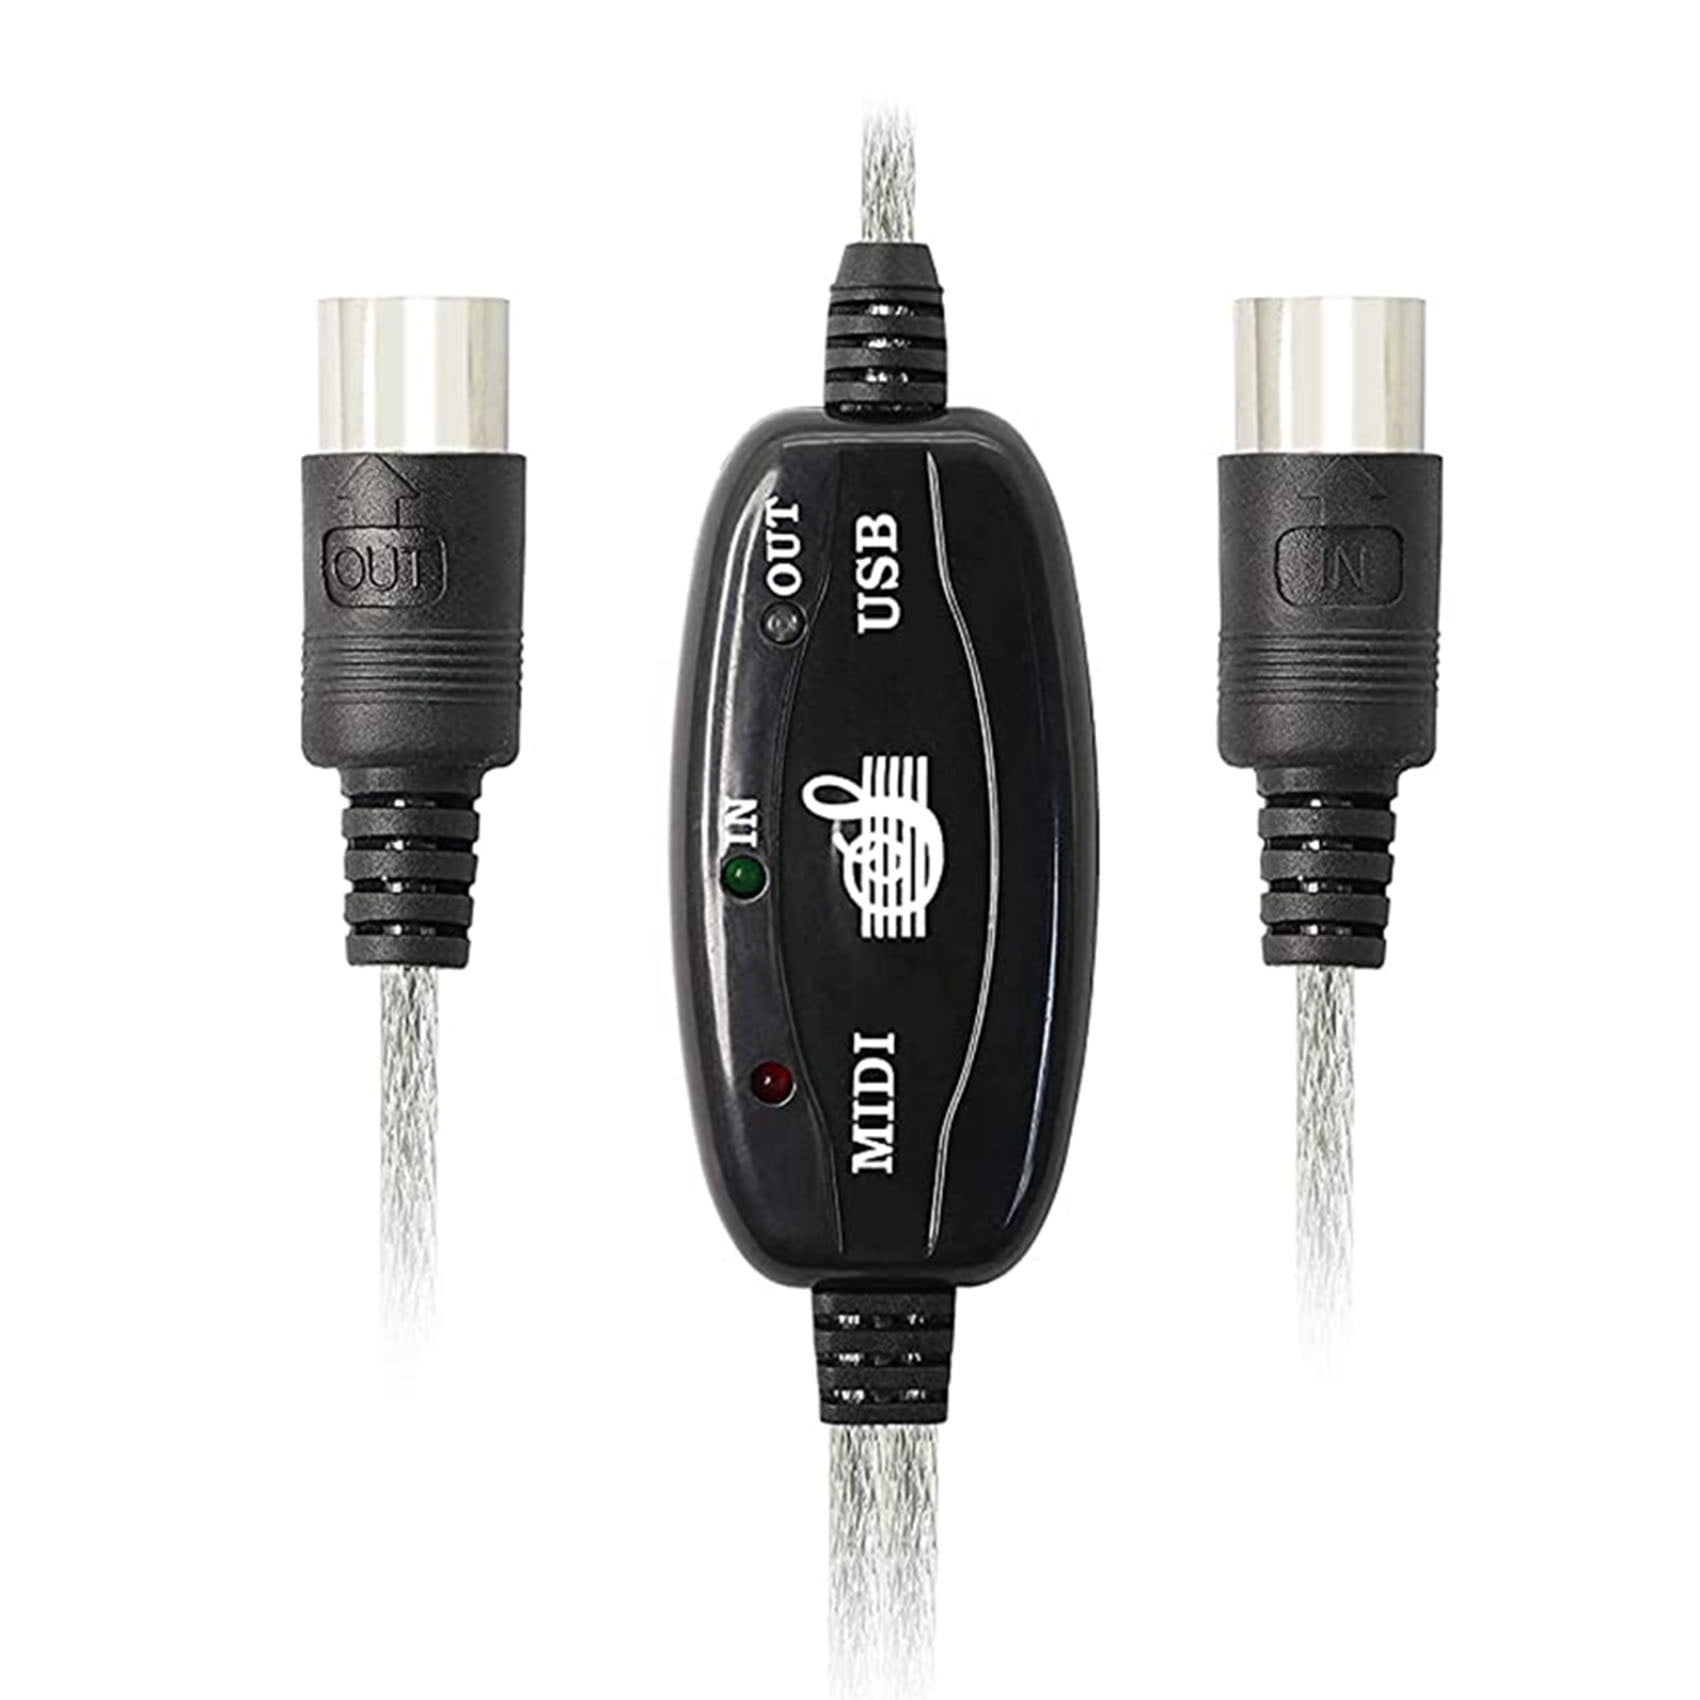 5 Pin MIDI In-Out Interface to USB Converter Cable for MIDI Music